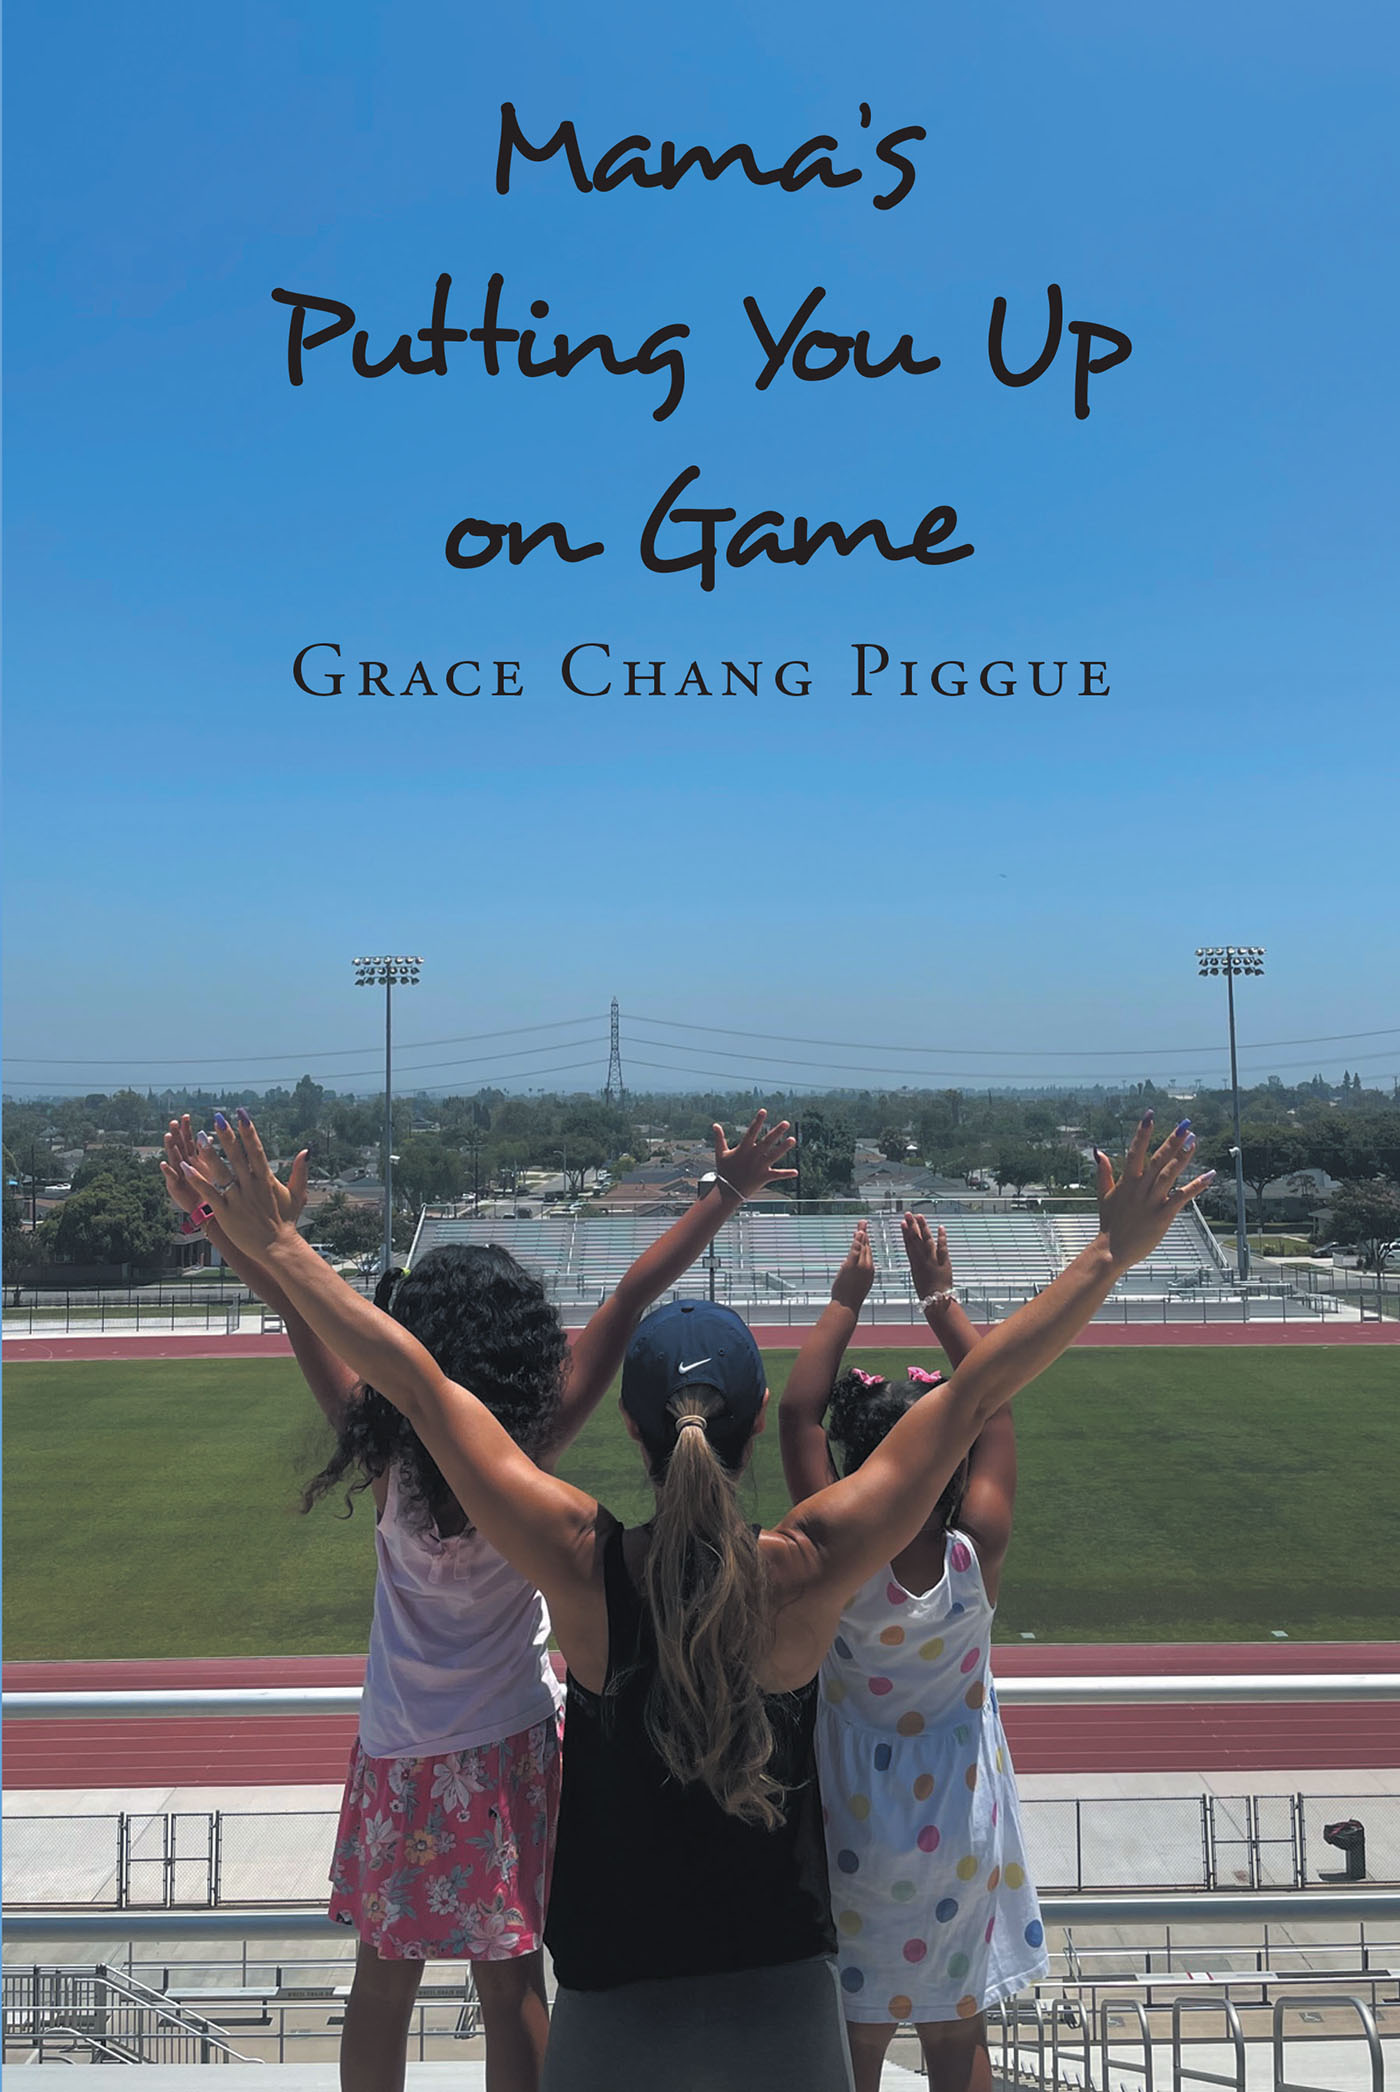 Grace Chang Piggue’s Newly Released "Mama’s Putting You Up on Game" is a Touching Memoir That Examines the Challenges and Blessings Along Life’s Path